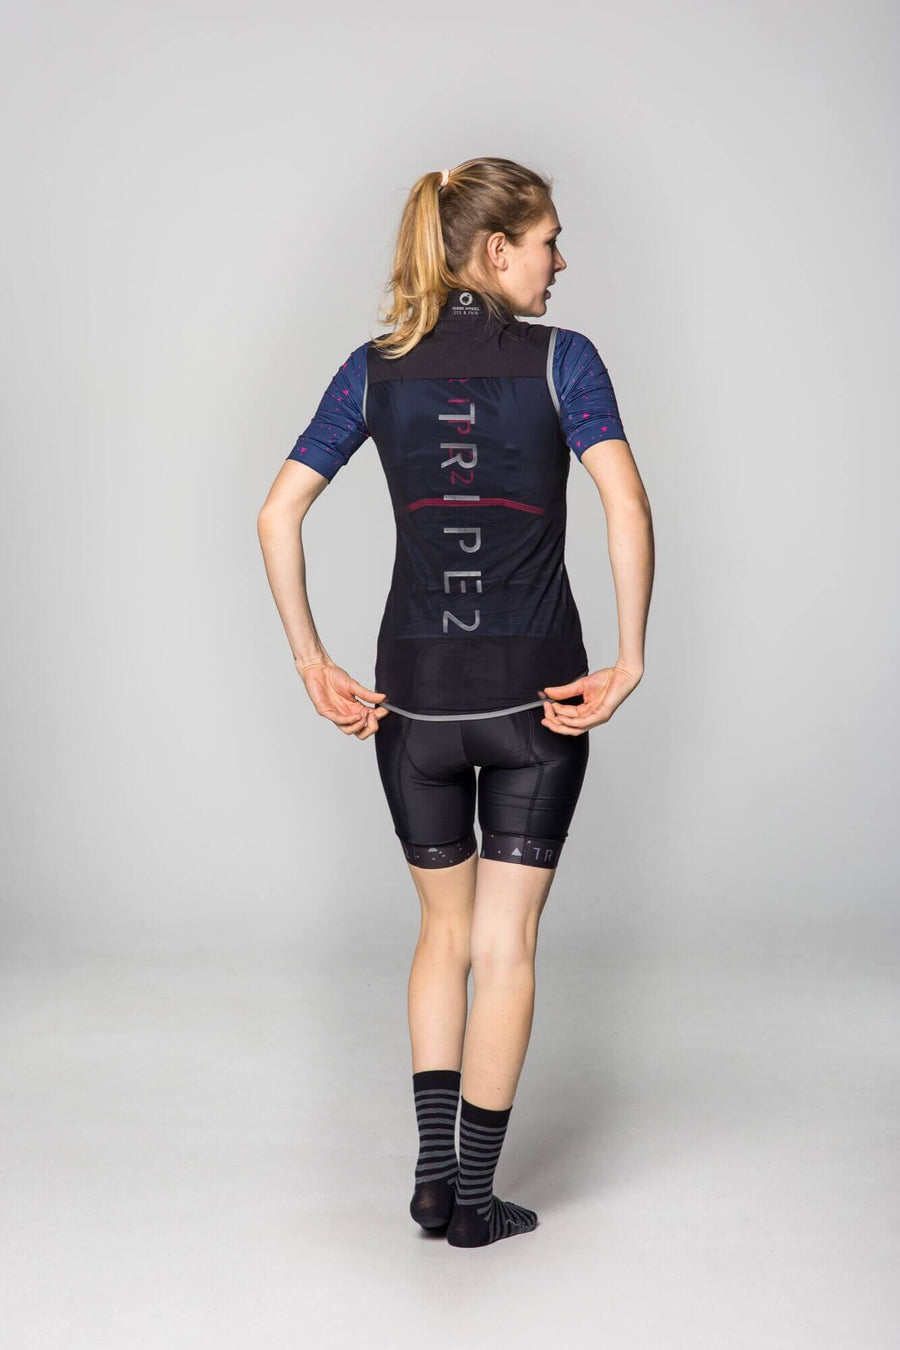 Women‘s - KAMSOOL Een Westen % OUTLET ARCHIV 1st Edt. Anthracite Frühjahr / Sommer Herbst / Winter Jacken & Westen L M Mountainbike PFC Free PRO - Tight - Race Cut Recycled Polyamide Road & Gravel S spo-default spo-disabled spo-notify-me-disabled tops Winter-Guide315 Women XS